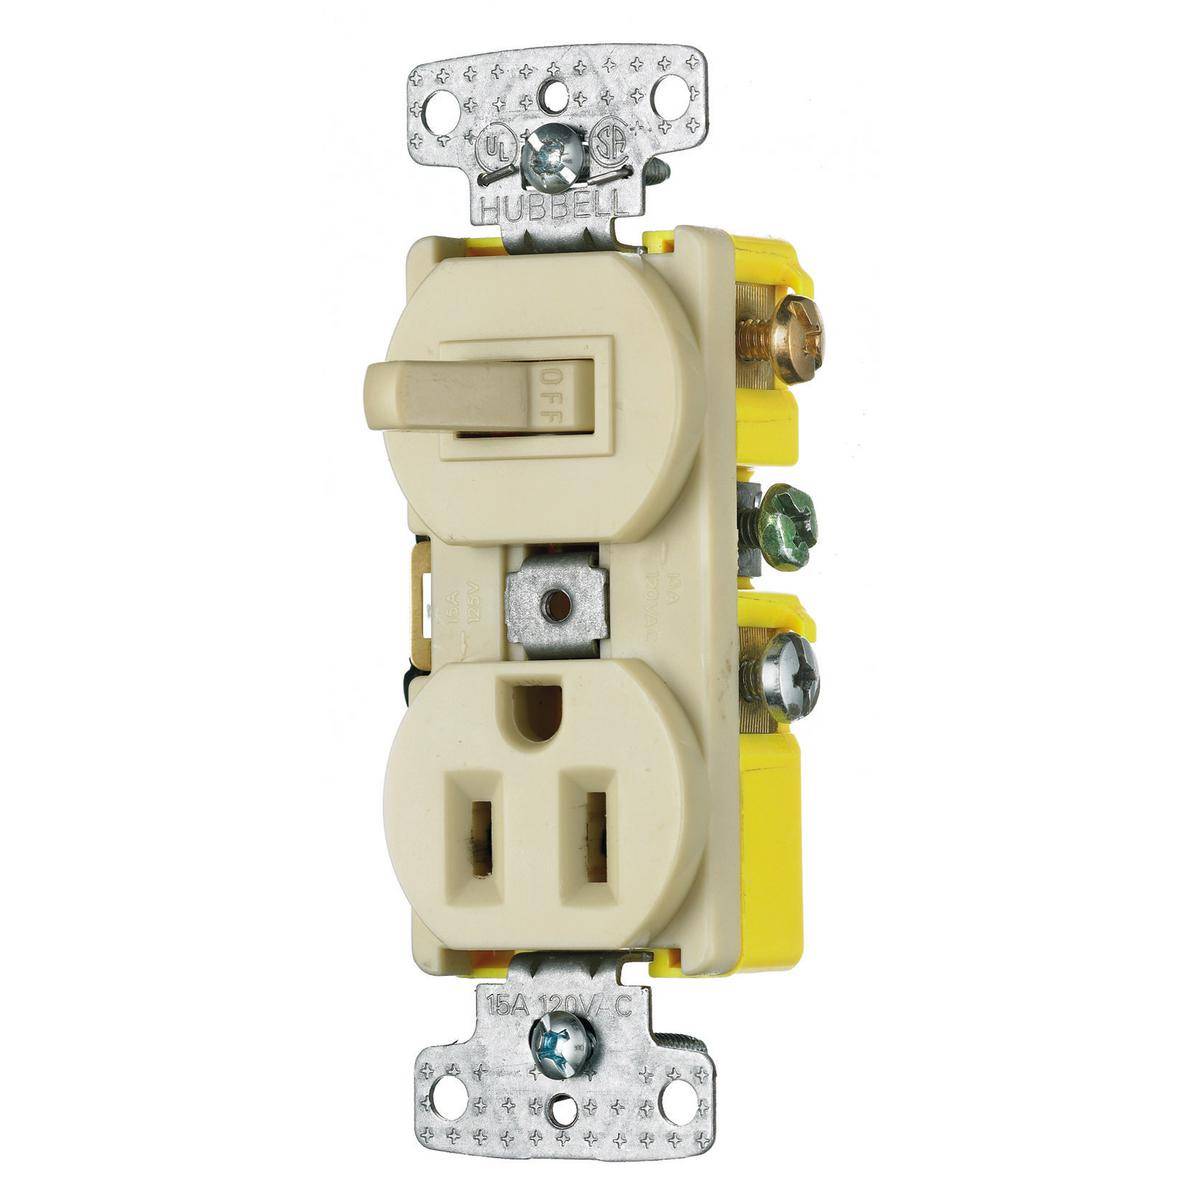 Wiring Device-Kellems RC108I Traditional 2-Position Standard Traditional Switch And Receptacle, Electrical Ratings: 120/125 VAC, 15 A, 1800 W, 1 Poles, 3 Wires, Snap Switch Reset